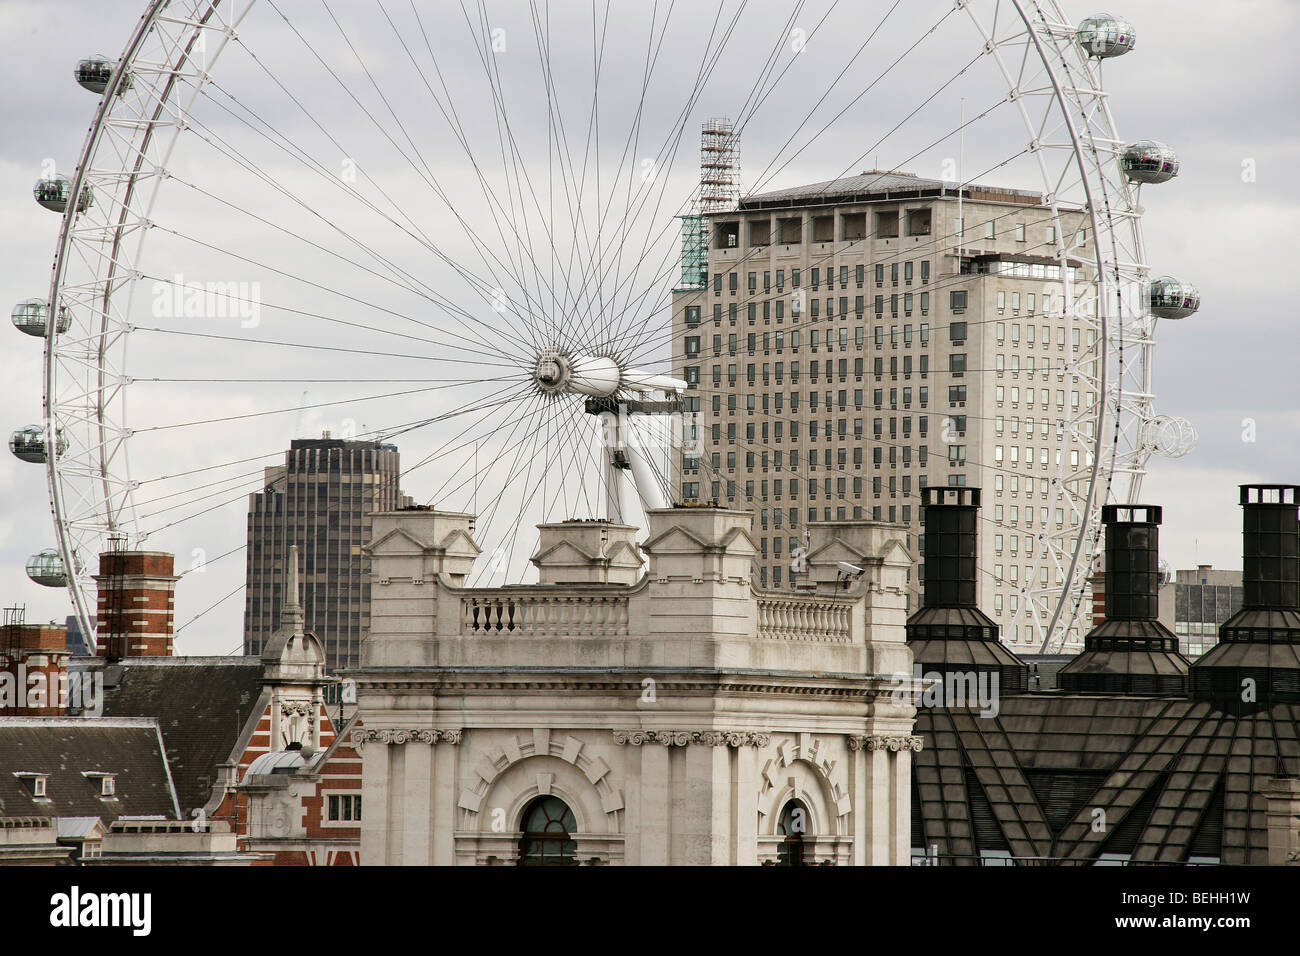 Rooftop view over London, England, UK taking in the London Eye wheel, the shell building and portcullis house. Stock Photo